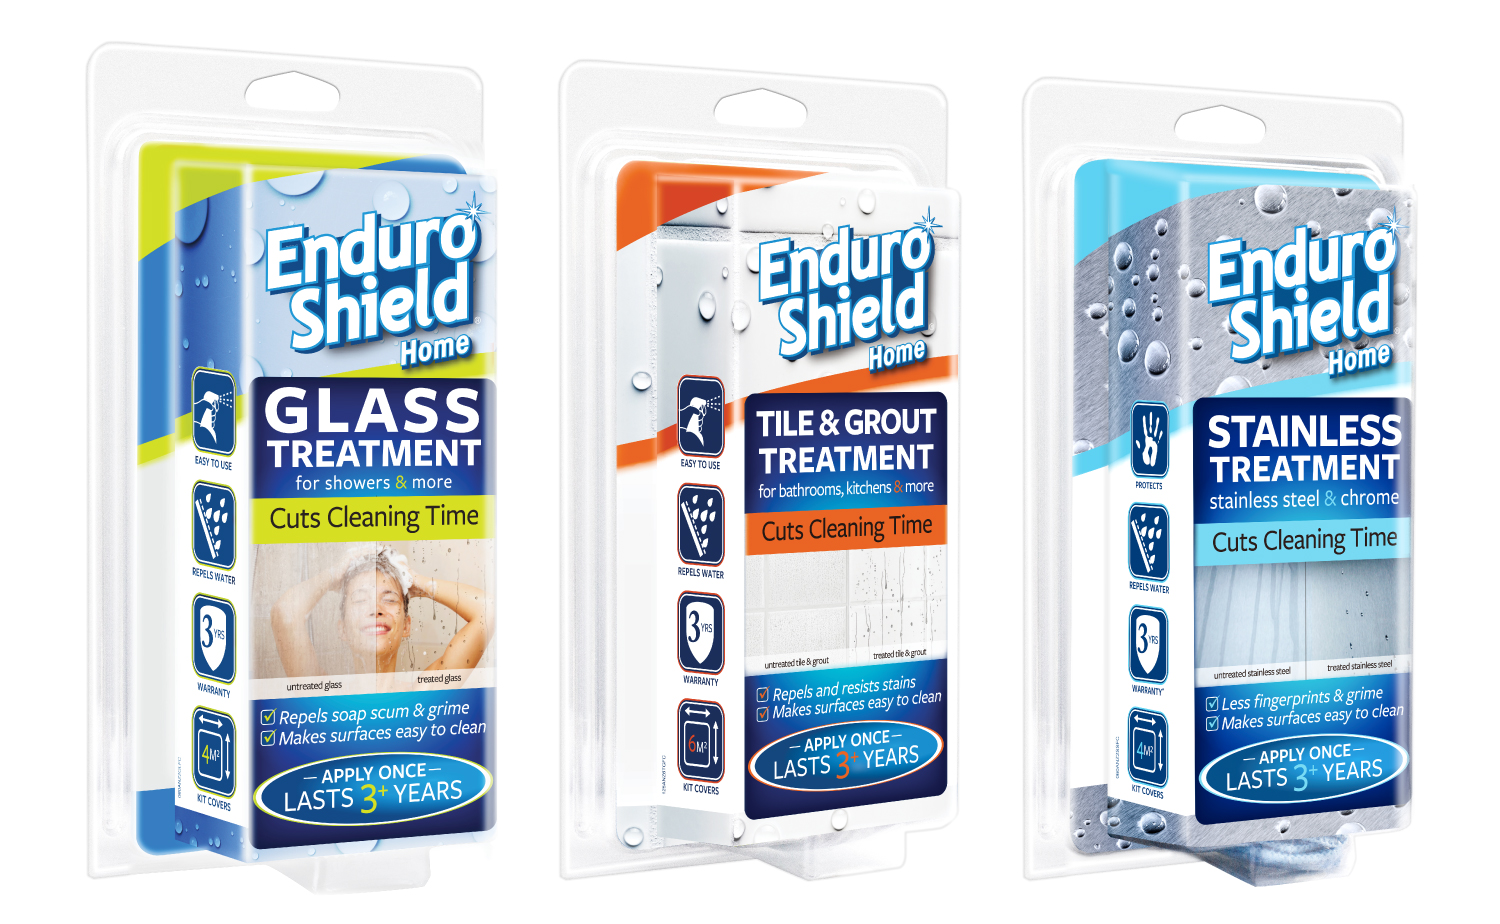 Enduro Shield Glass Treatment for Showers & More - Repels Soap Scum For  3yrs NEW